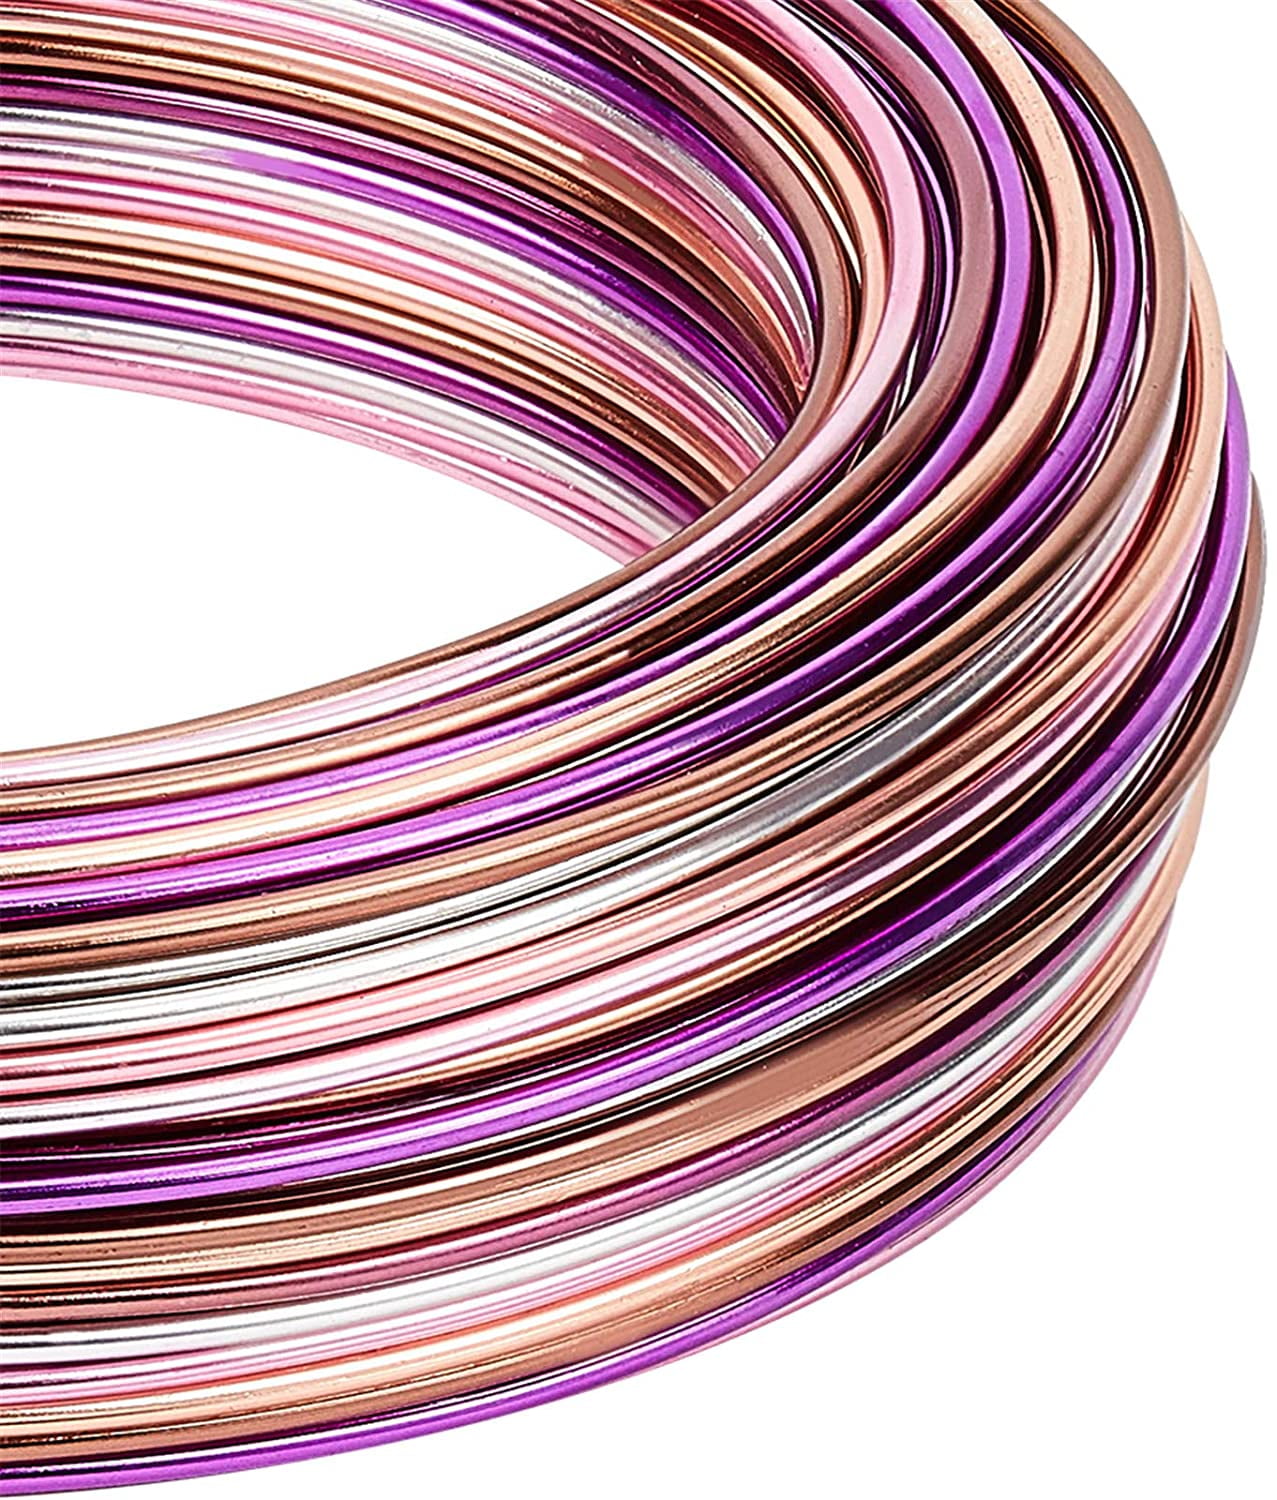 aluminum crafting wire, jewelry wire, 12 gauge, rose pink, wire, craft  wire, 39 feet, jewelry making, vintage supplies, jewelry supplies, pink  wire